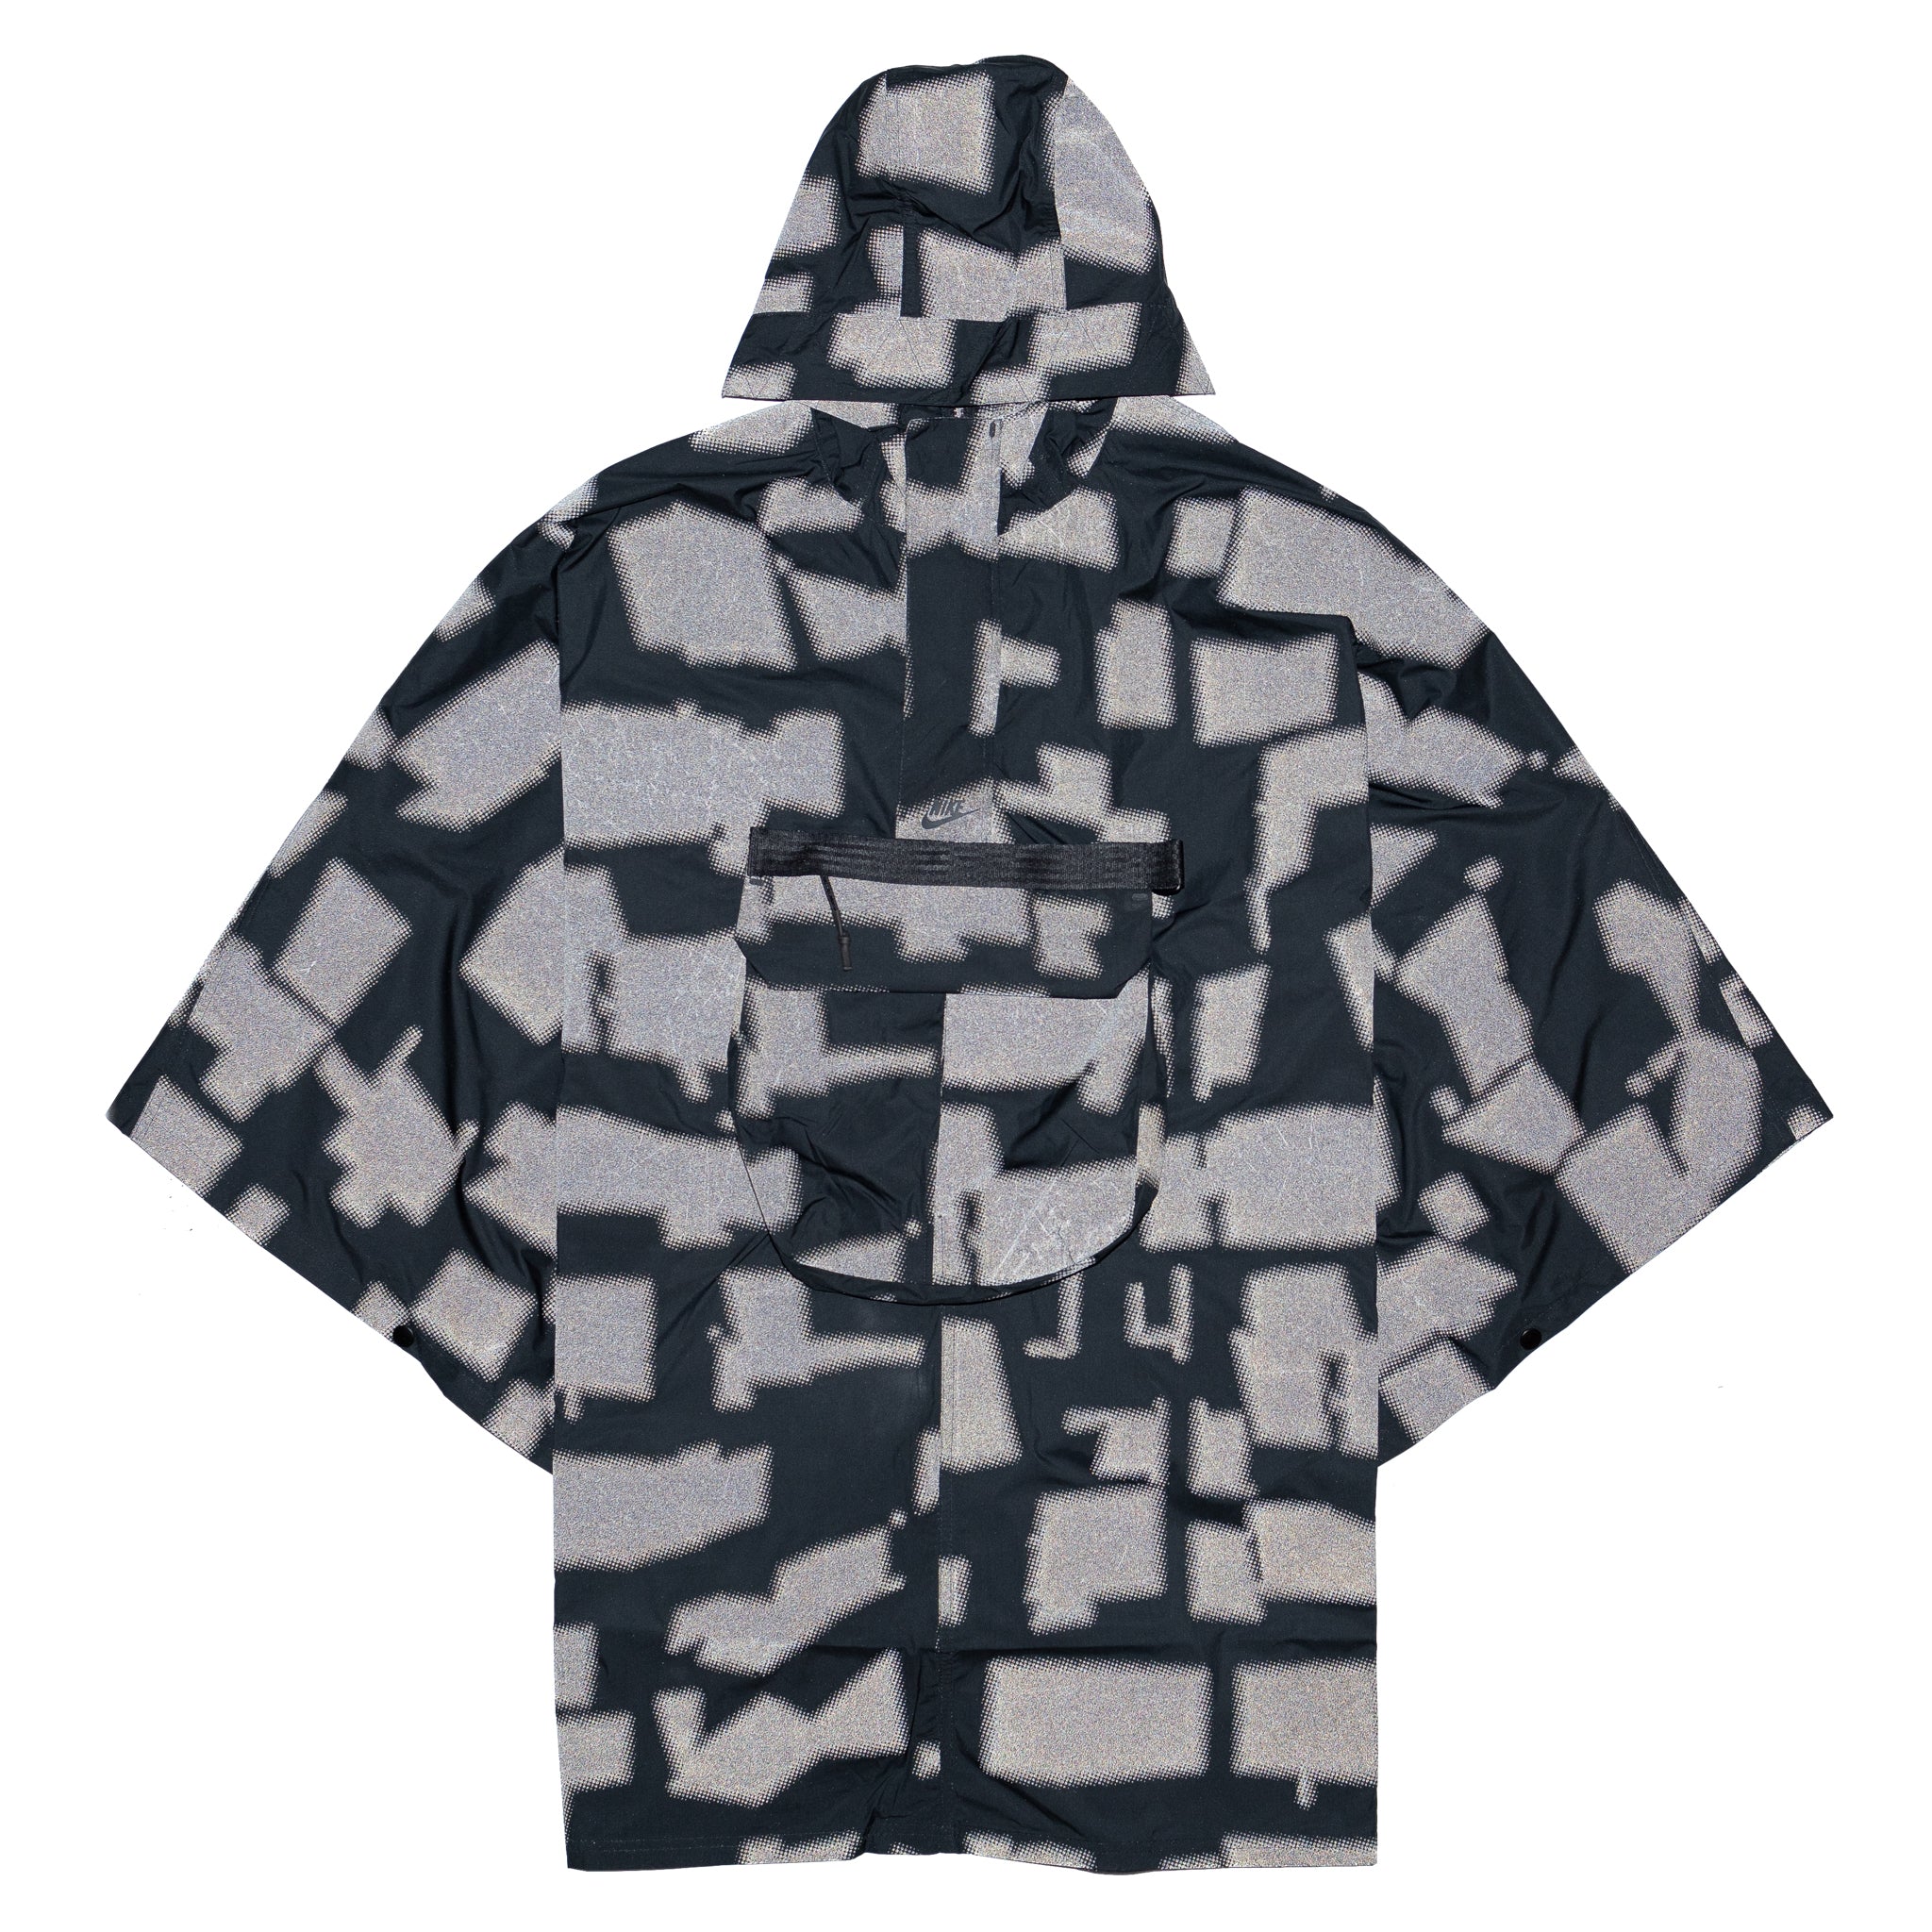 Nike Storm-Fit Tech Pack Poncho